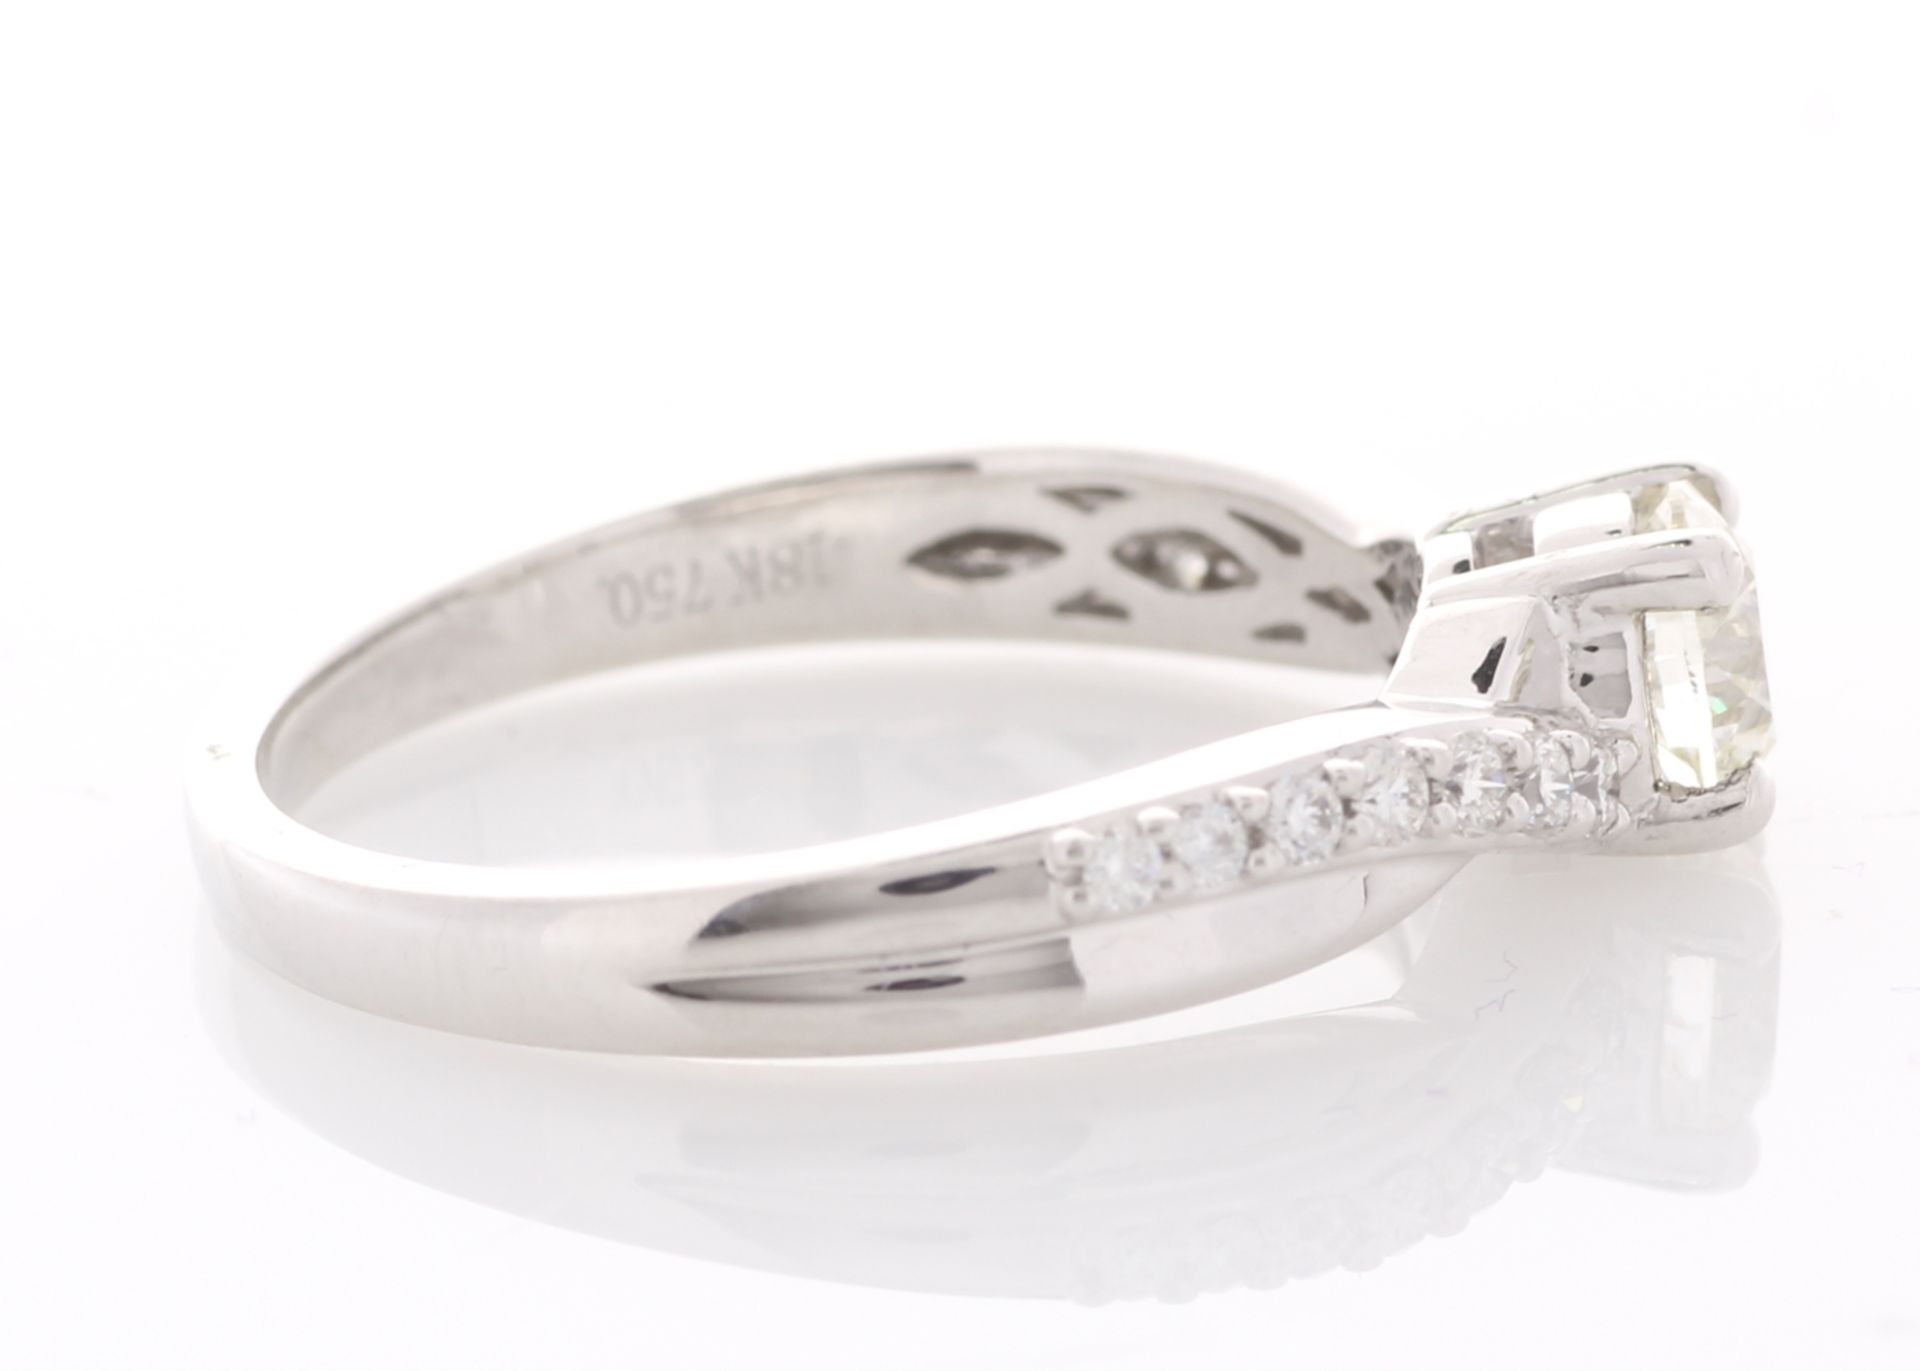 18ct White Gold Single Stone Fancy Claw Set Diamond Ring (0.52) 0.70 Carats - Image 4 of 5